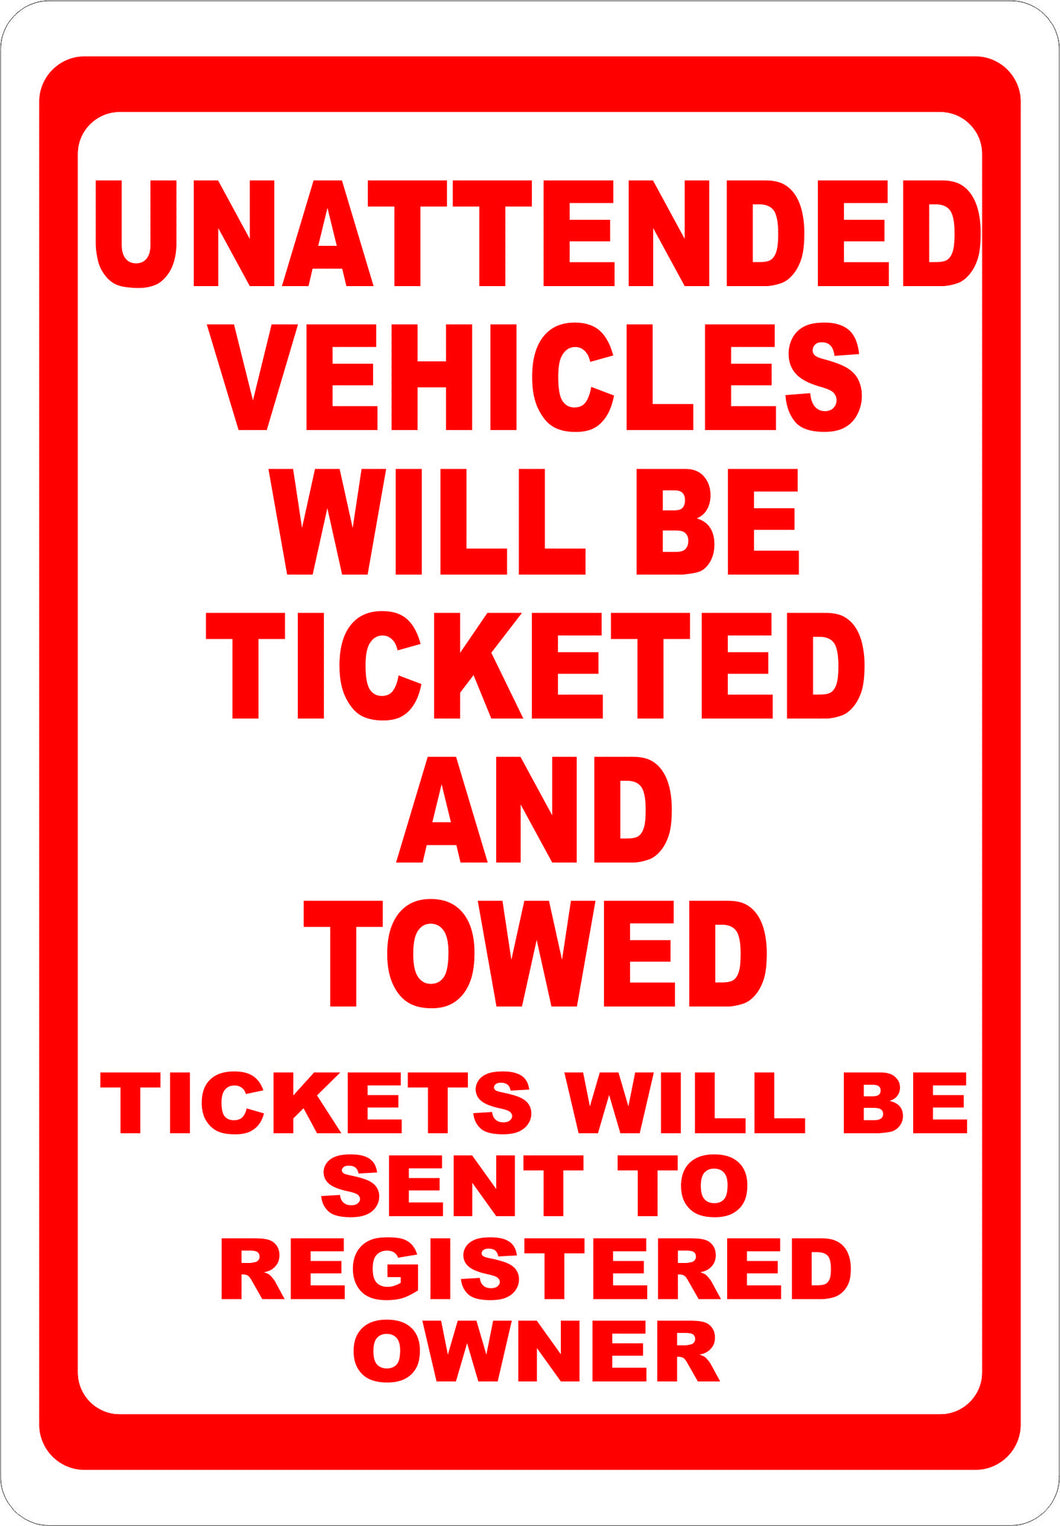 Unattended Vehicles Will Be Ticketed and Towed Sign - Signs & Decals by SalaGraphics